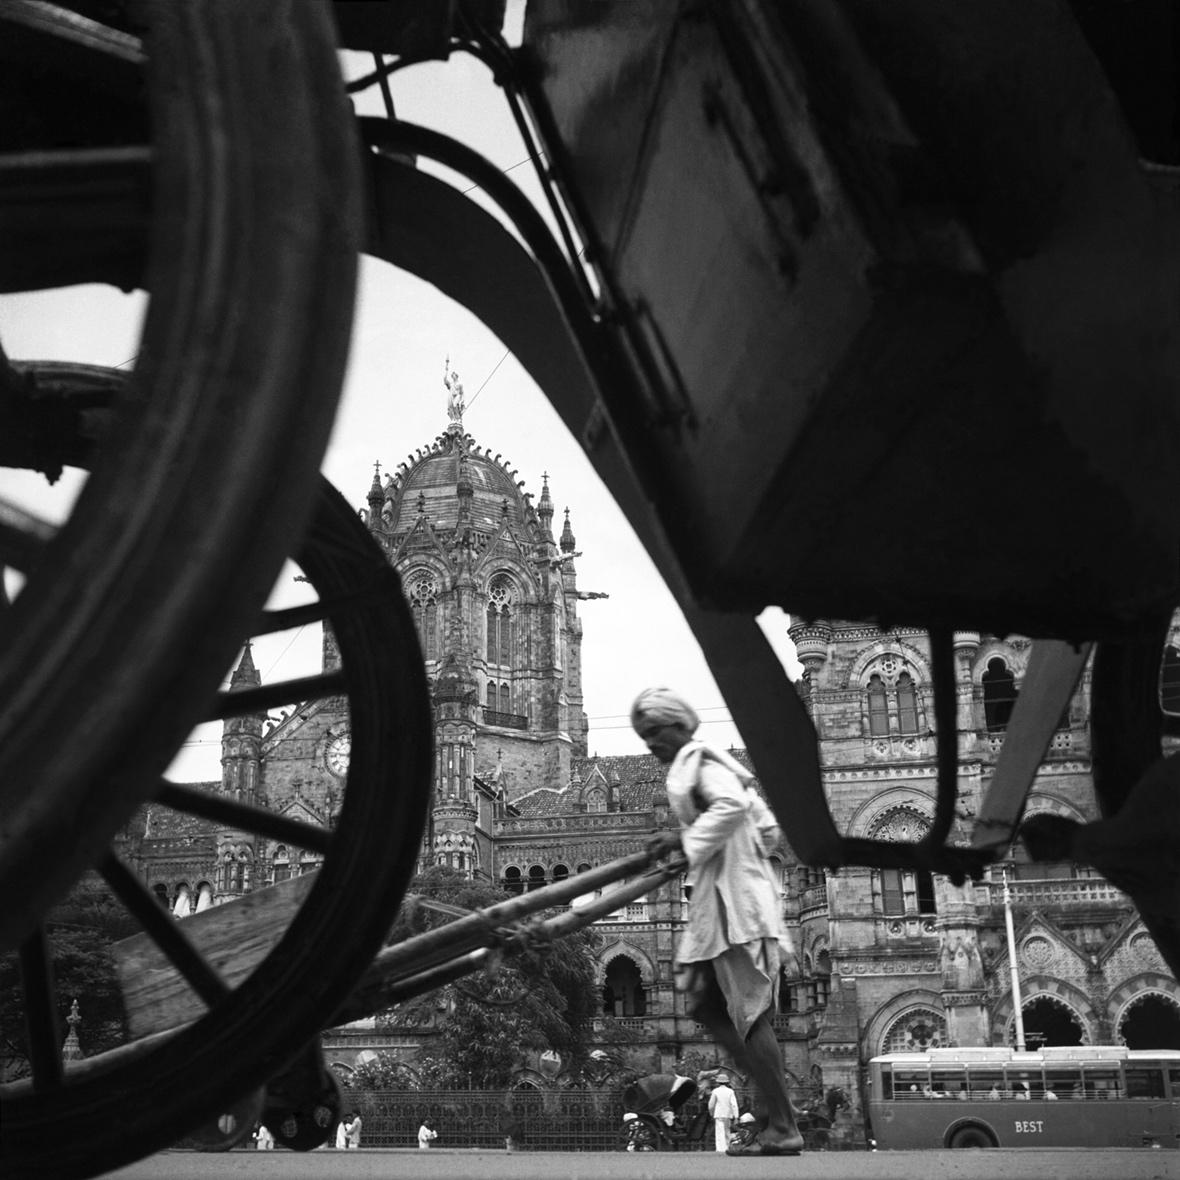 Homai Vyarawalla (Indian, 1913–2012), The Victoria Terminus, Bombay, early 1940s. Inkjet print, printed later 11 9/16. 11 13/16 in. (29.3 x 30 cm). Alkazi Foundation for the Arts, New Delhi.